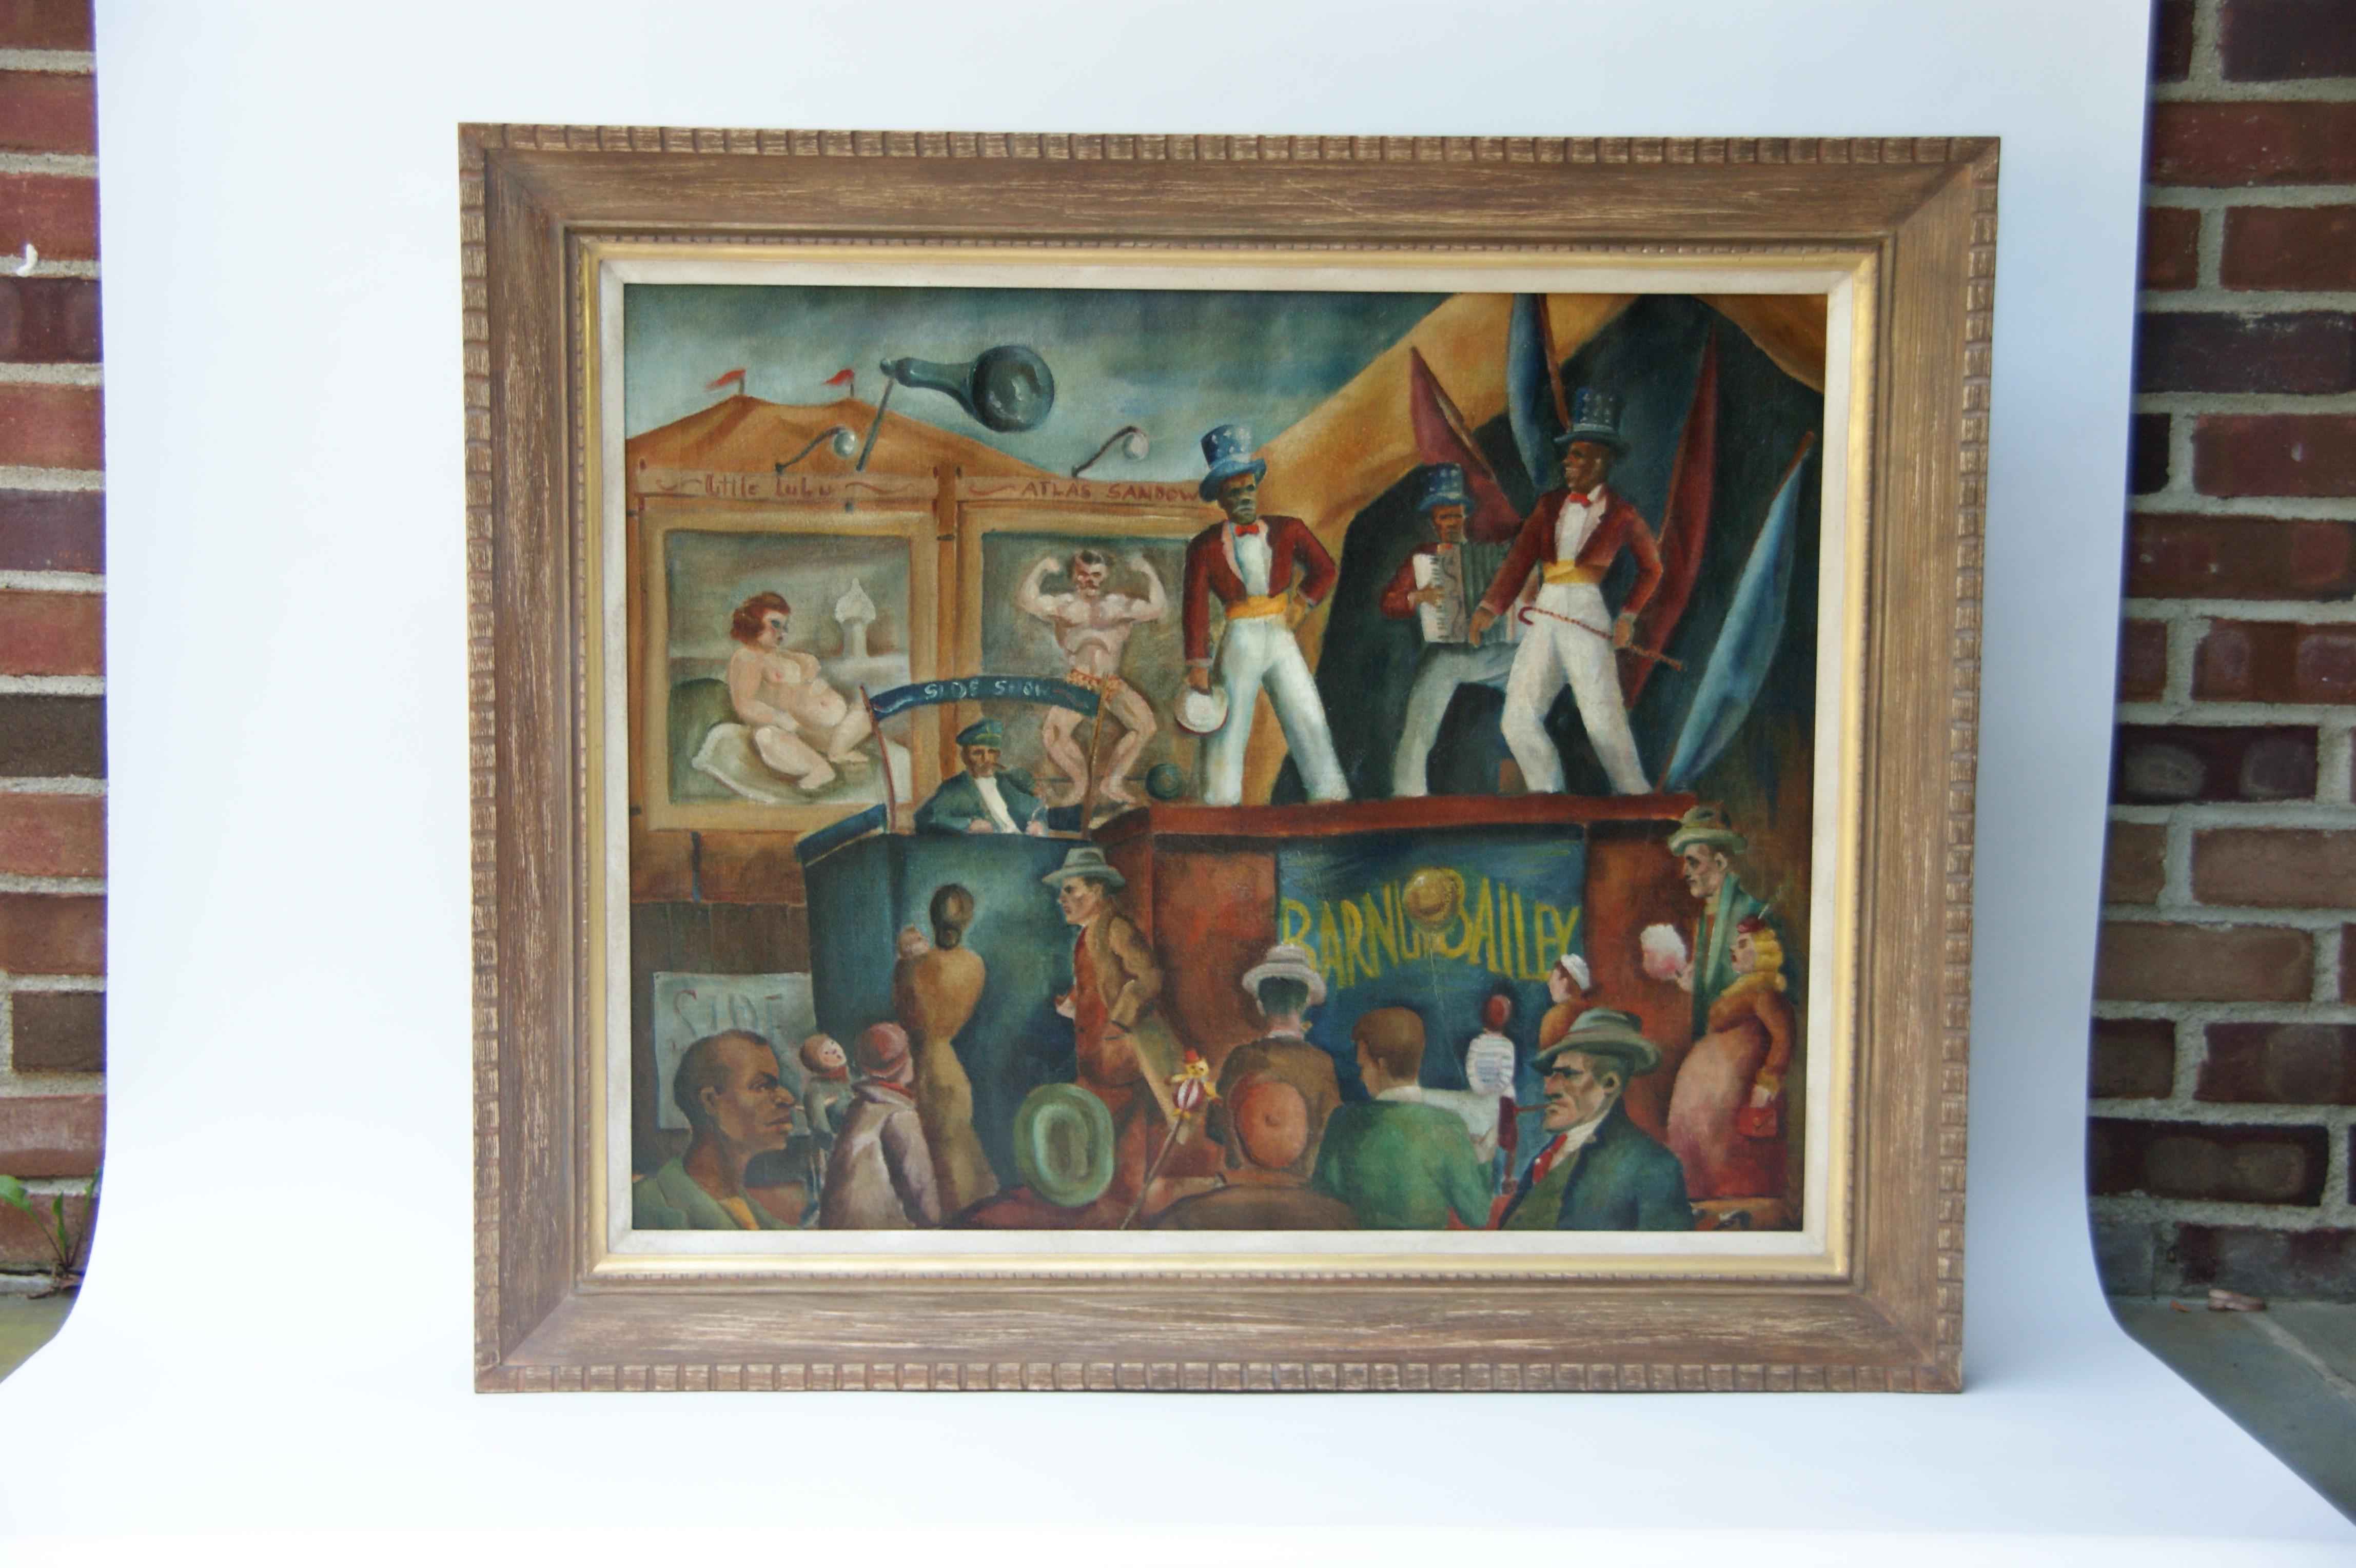 Barnum & Bailey, Ringling Bros. Circus WPA Figurative mid-century American Scene - American Realist Painting by Unknown